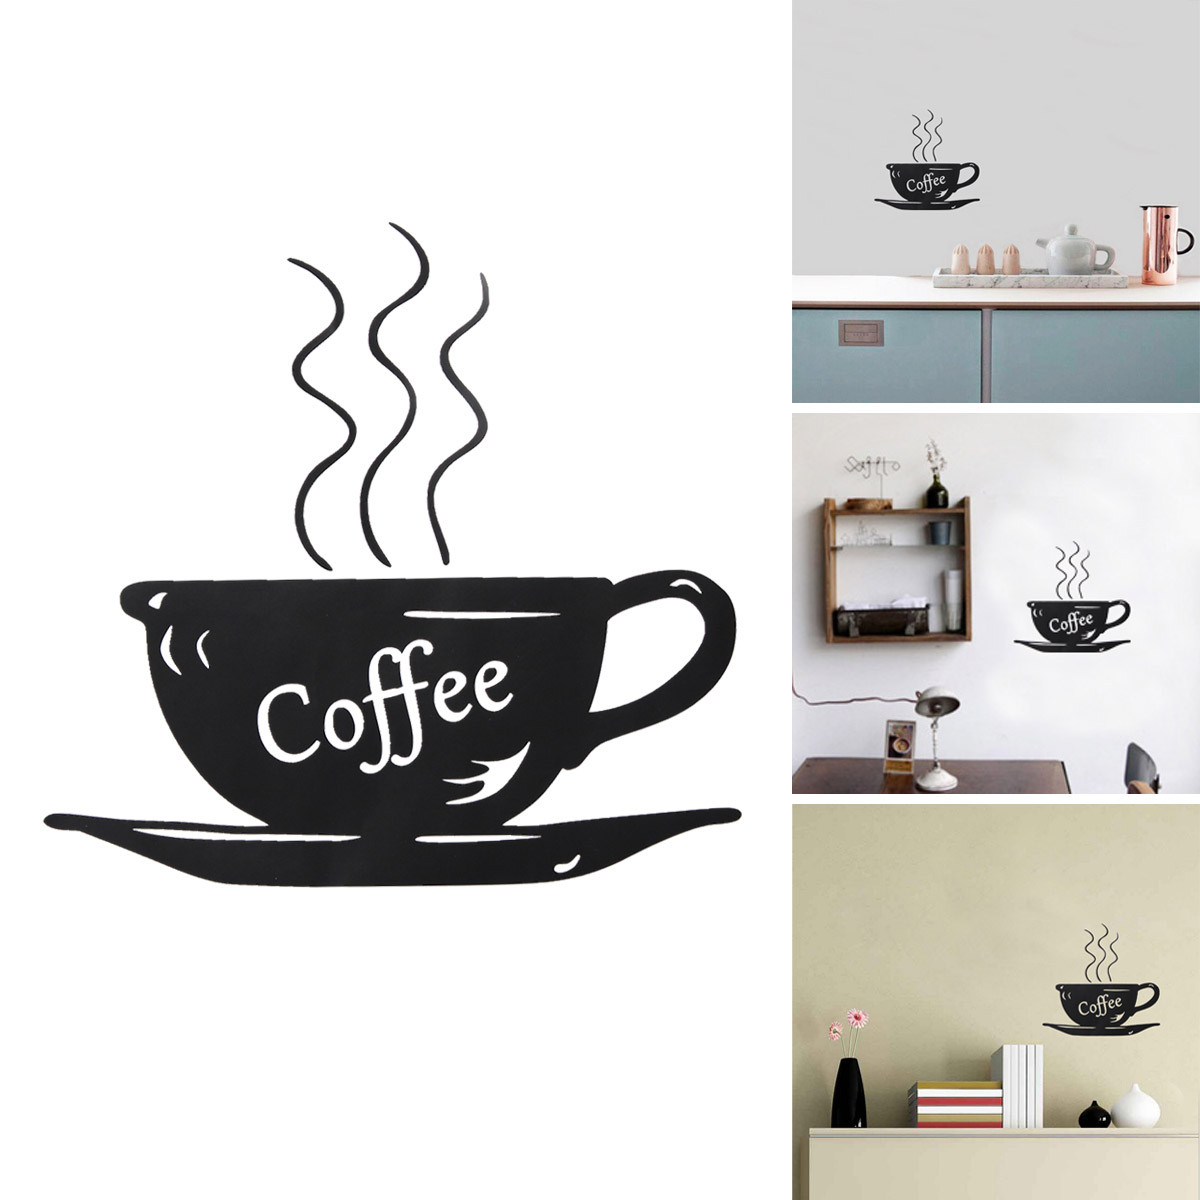 Coffee Wall Decor Kitchen
 DIY Removable Coffee Cup Quote Word Decal Vinyl Home